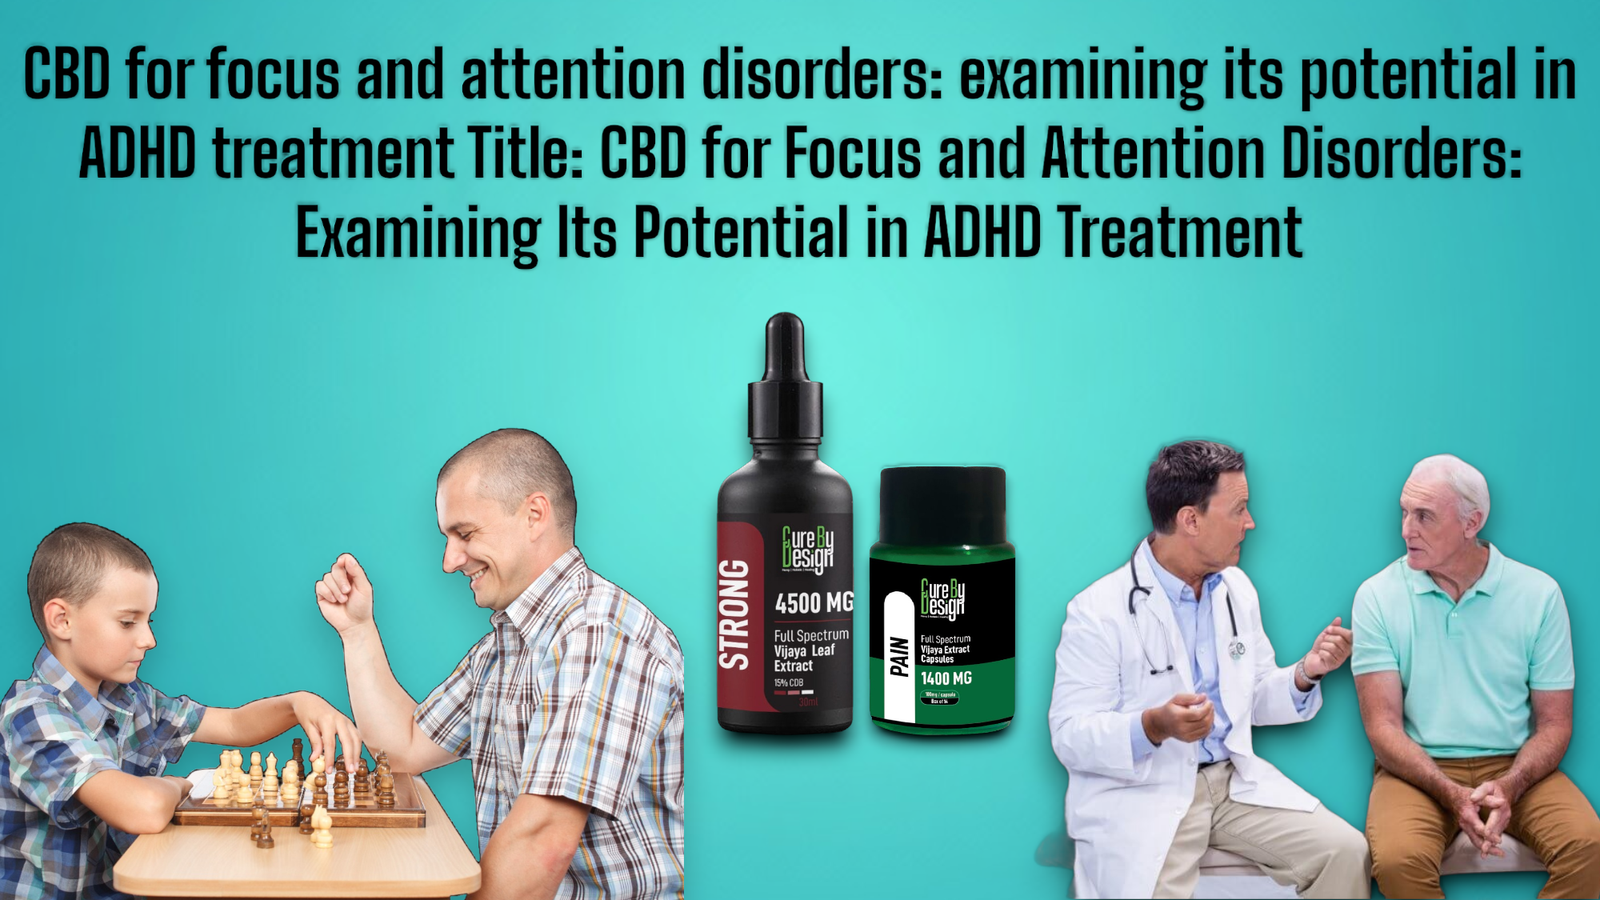 CBD for Focus and Attention Disorders: Examining Its Potential in ADHD Treatment